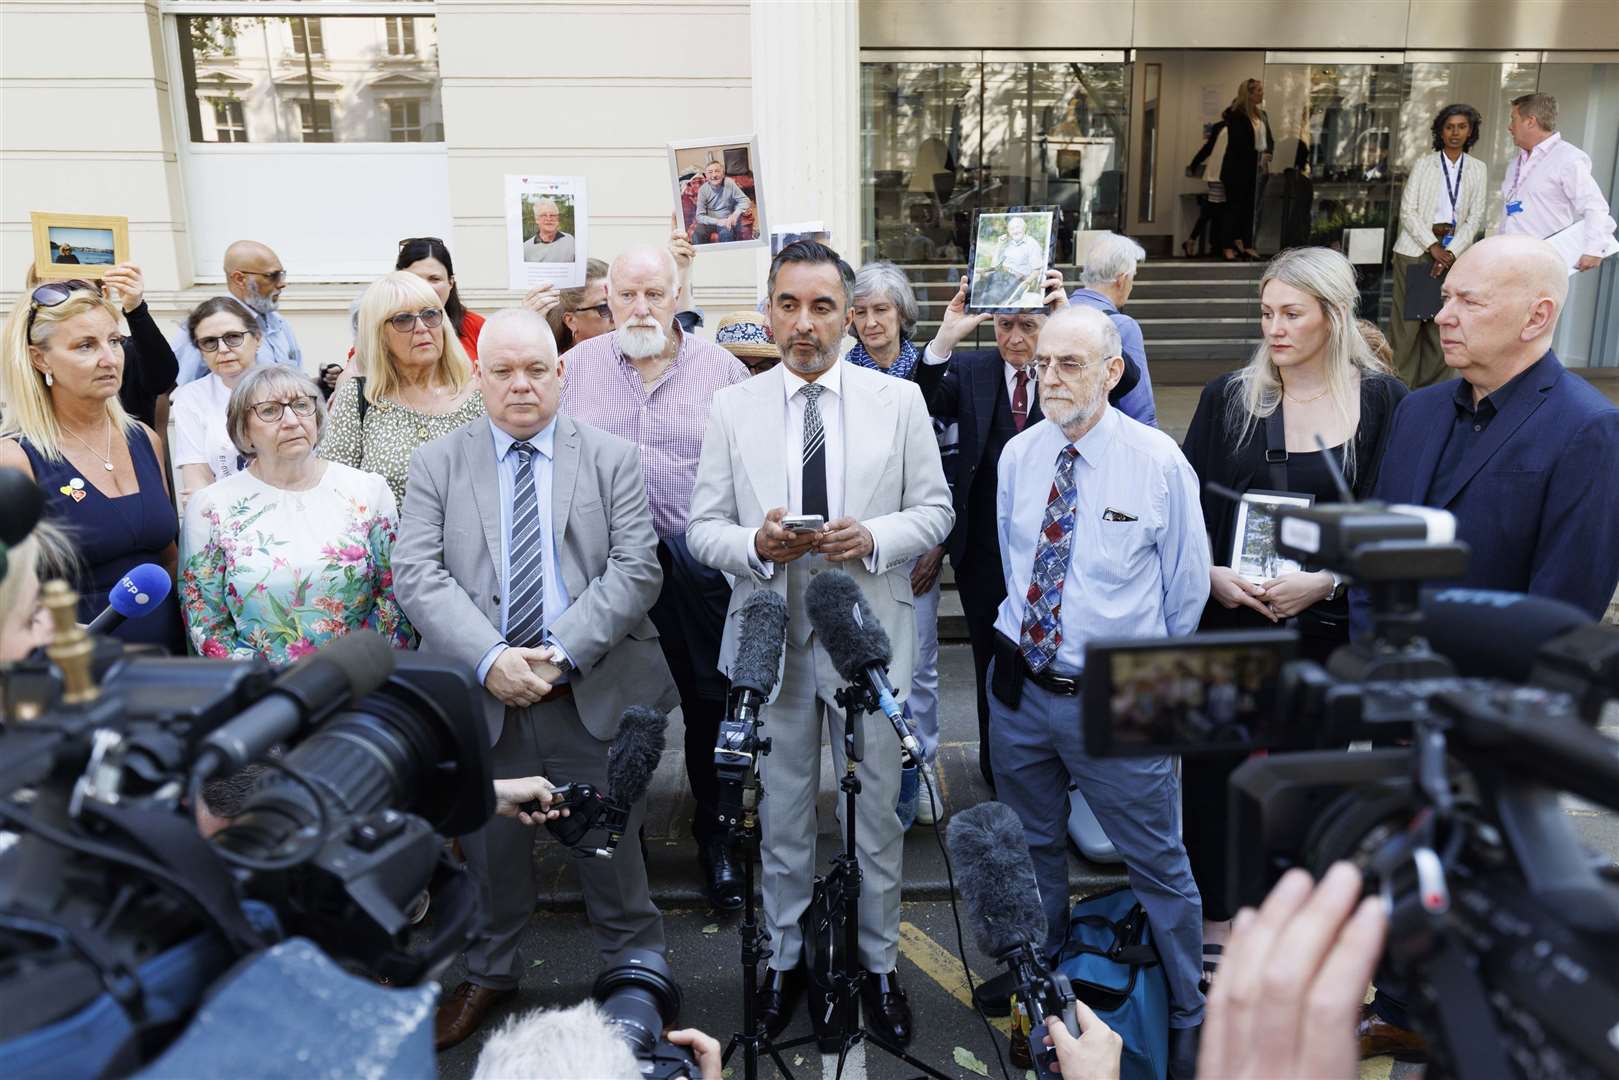 Aamer Anwar (centre), lead solicitor for the Scottish Covid Bereaved group, urged witnesses to speak with ‘absolute candour’ (Belinda Jiao/PA)